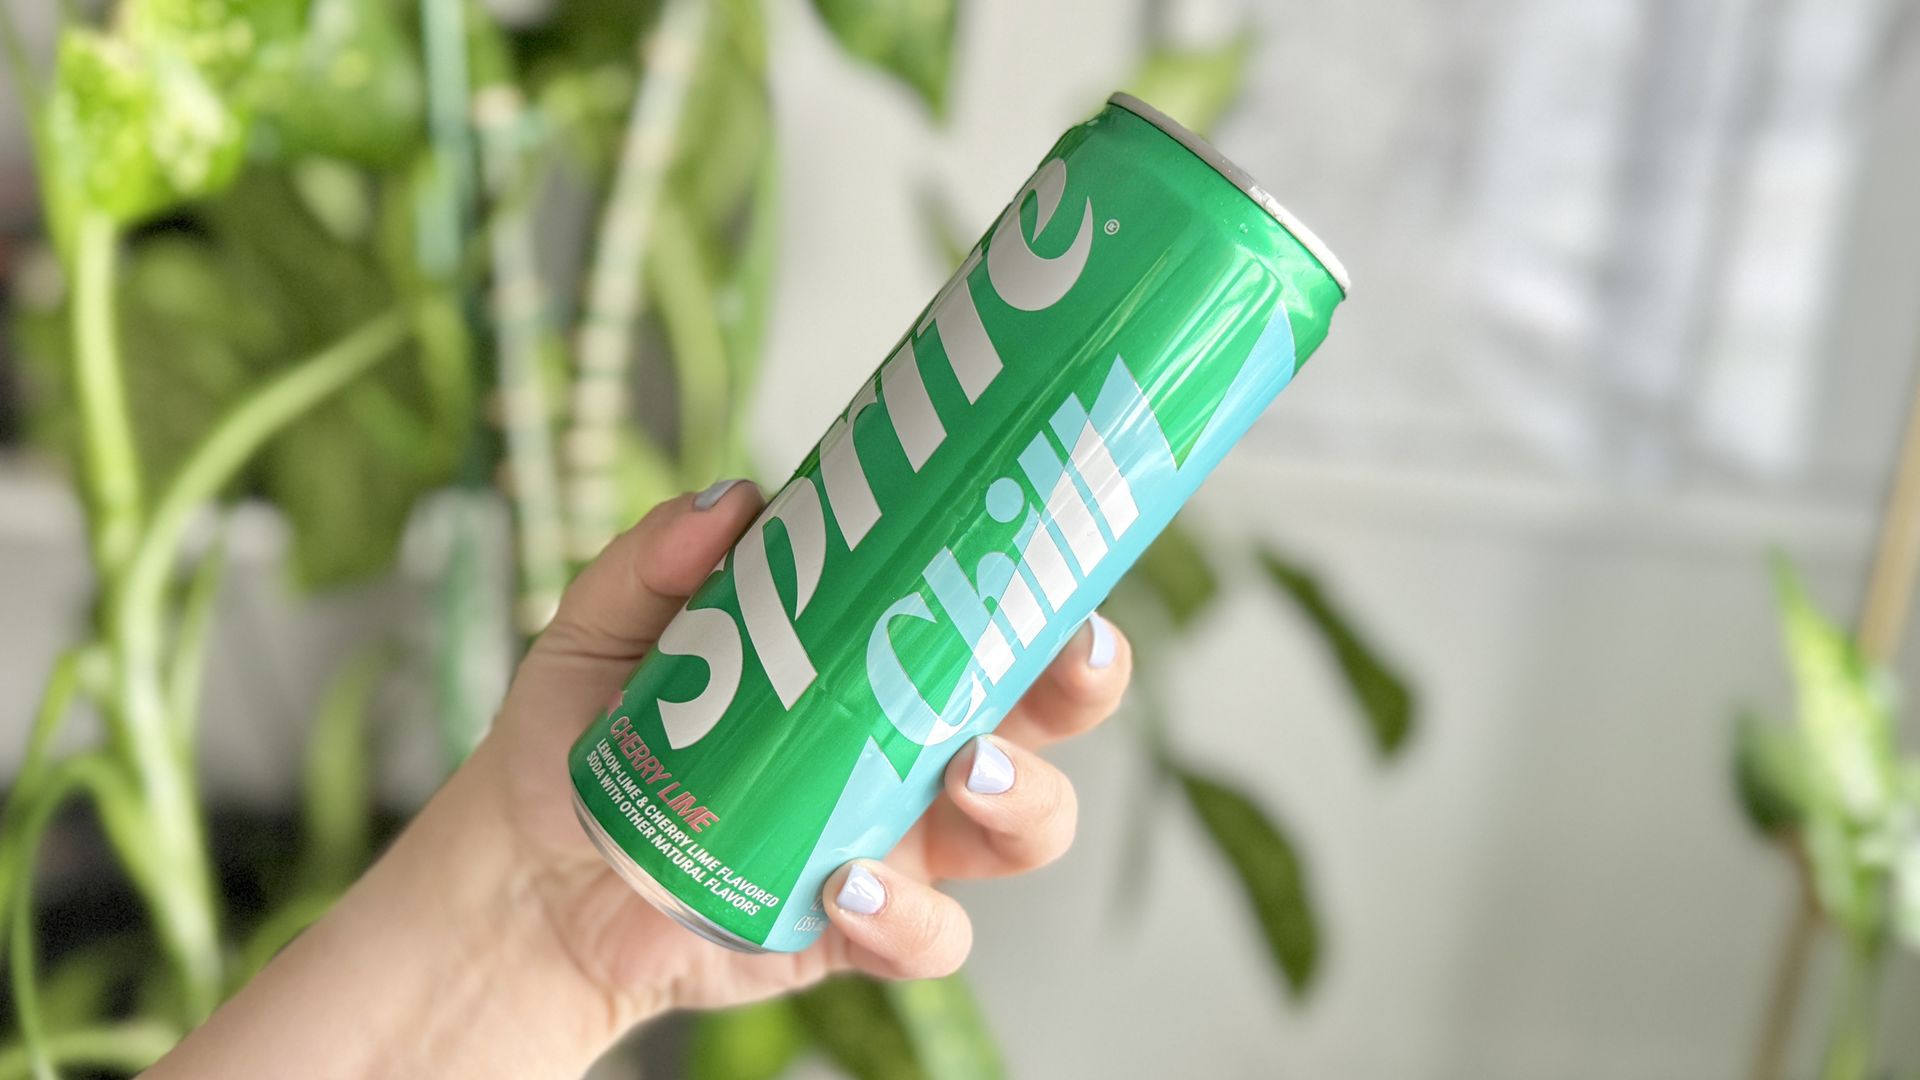 i tried the new sprite chill that tastes colder as you drink it, and it’s surprisingly awesome